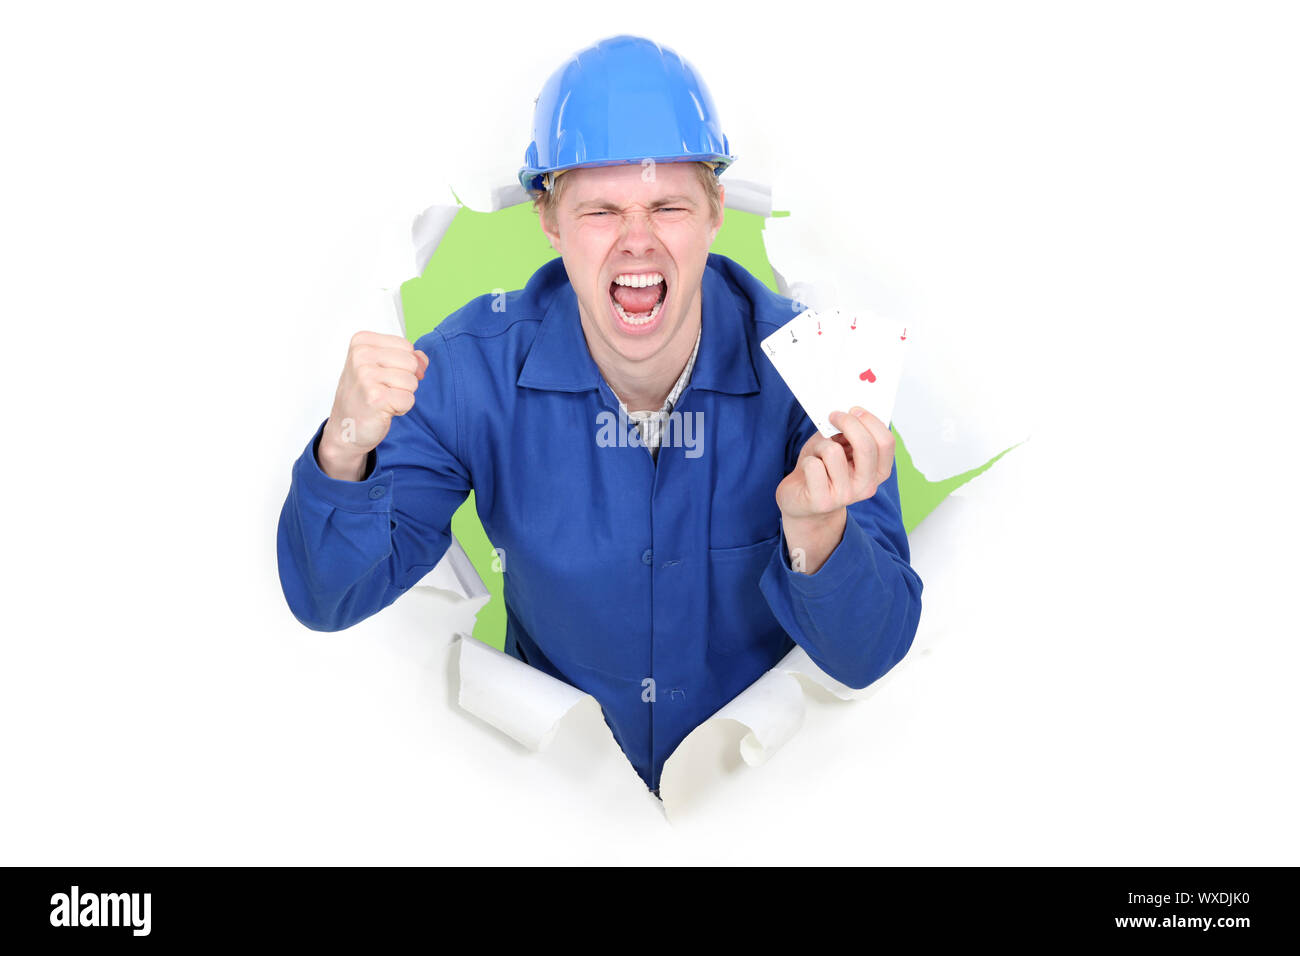 A happy manual worker. Stock Photo